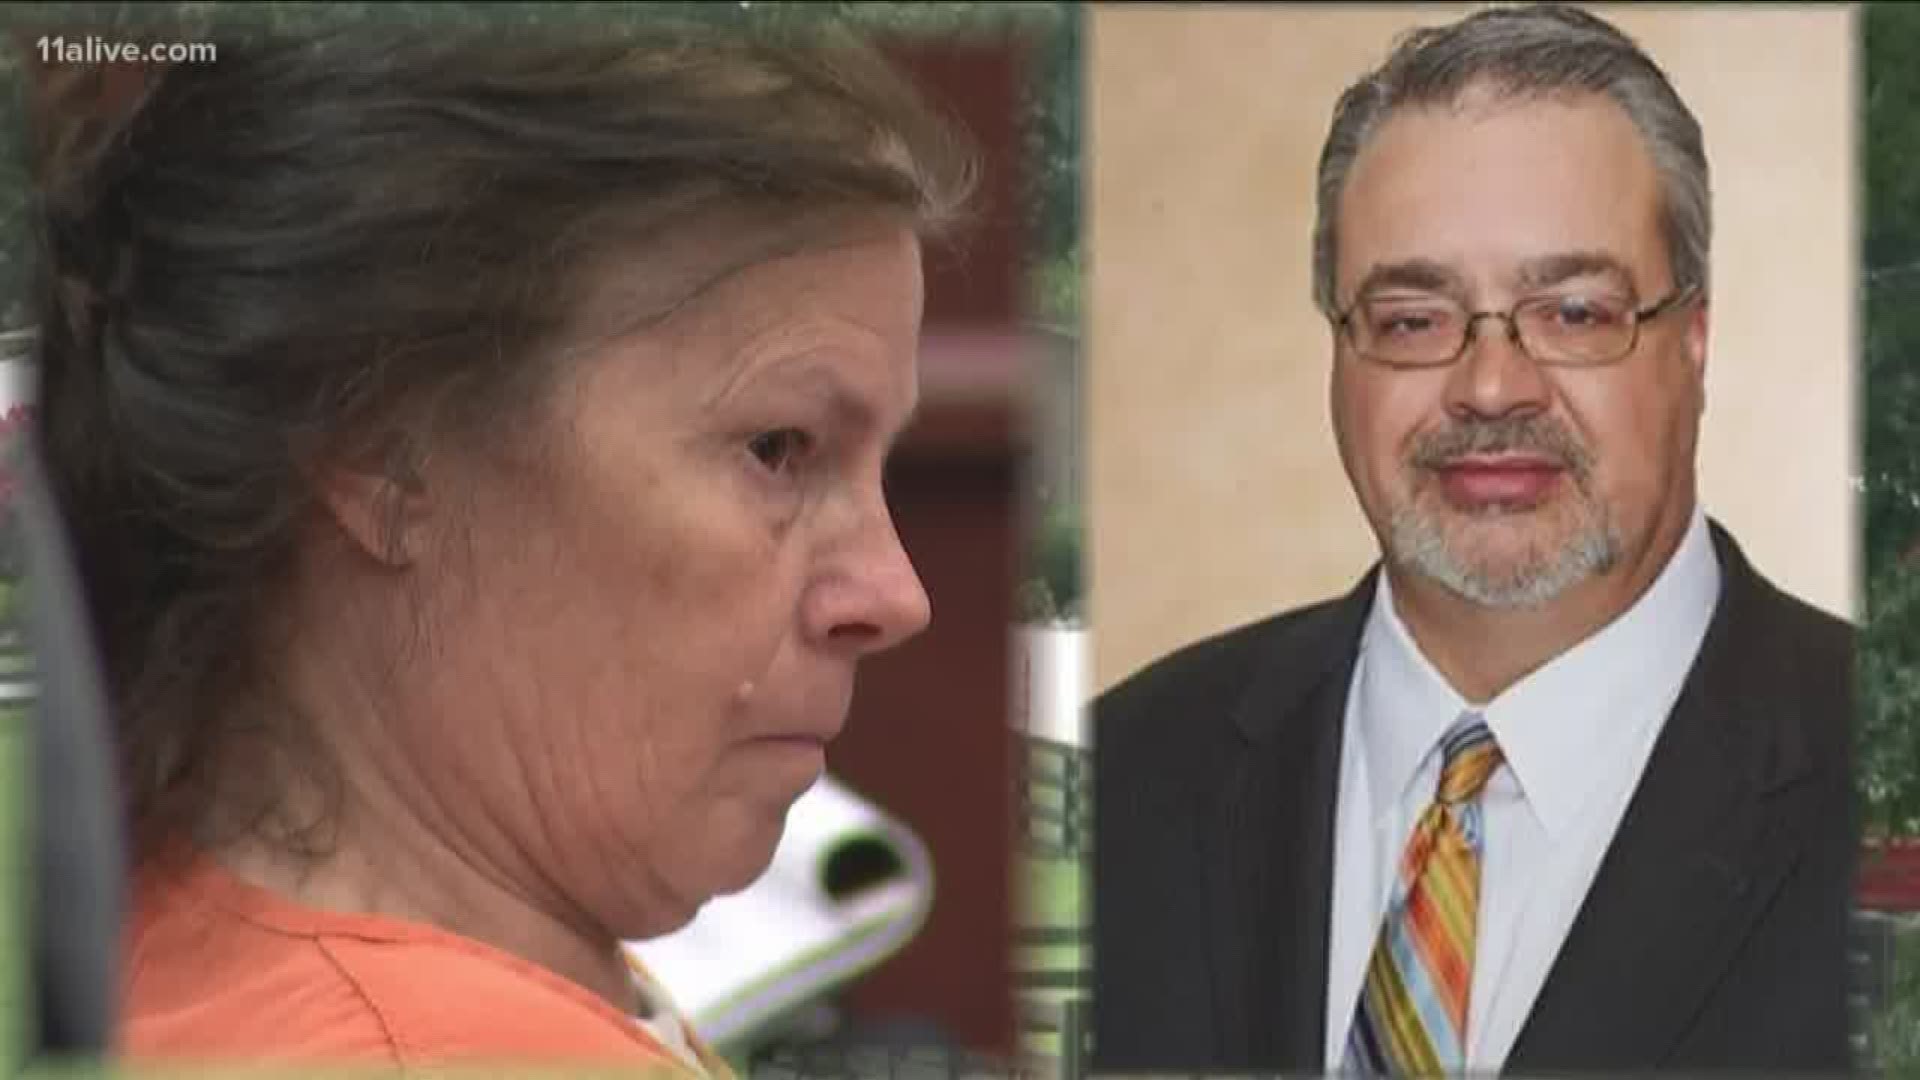 Melody Farris is accused of killing her husband, a high-powered attorney, and burning his body.